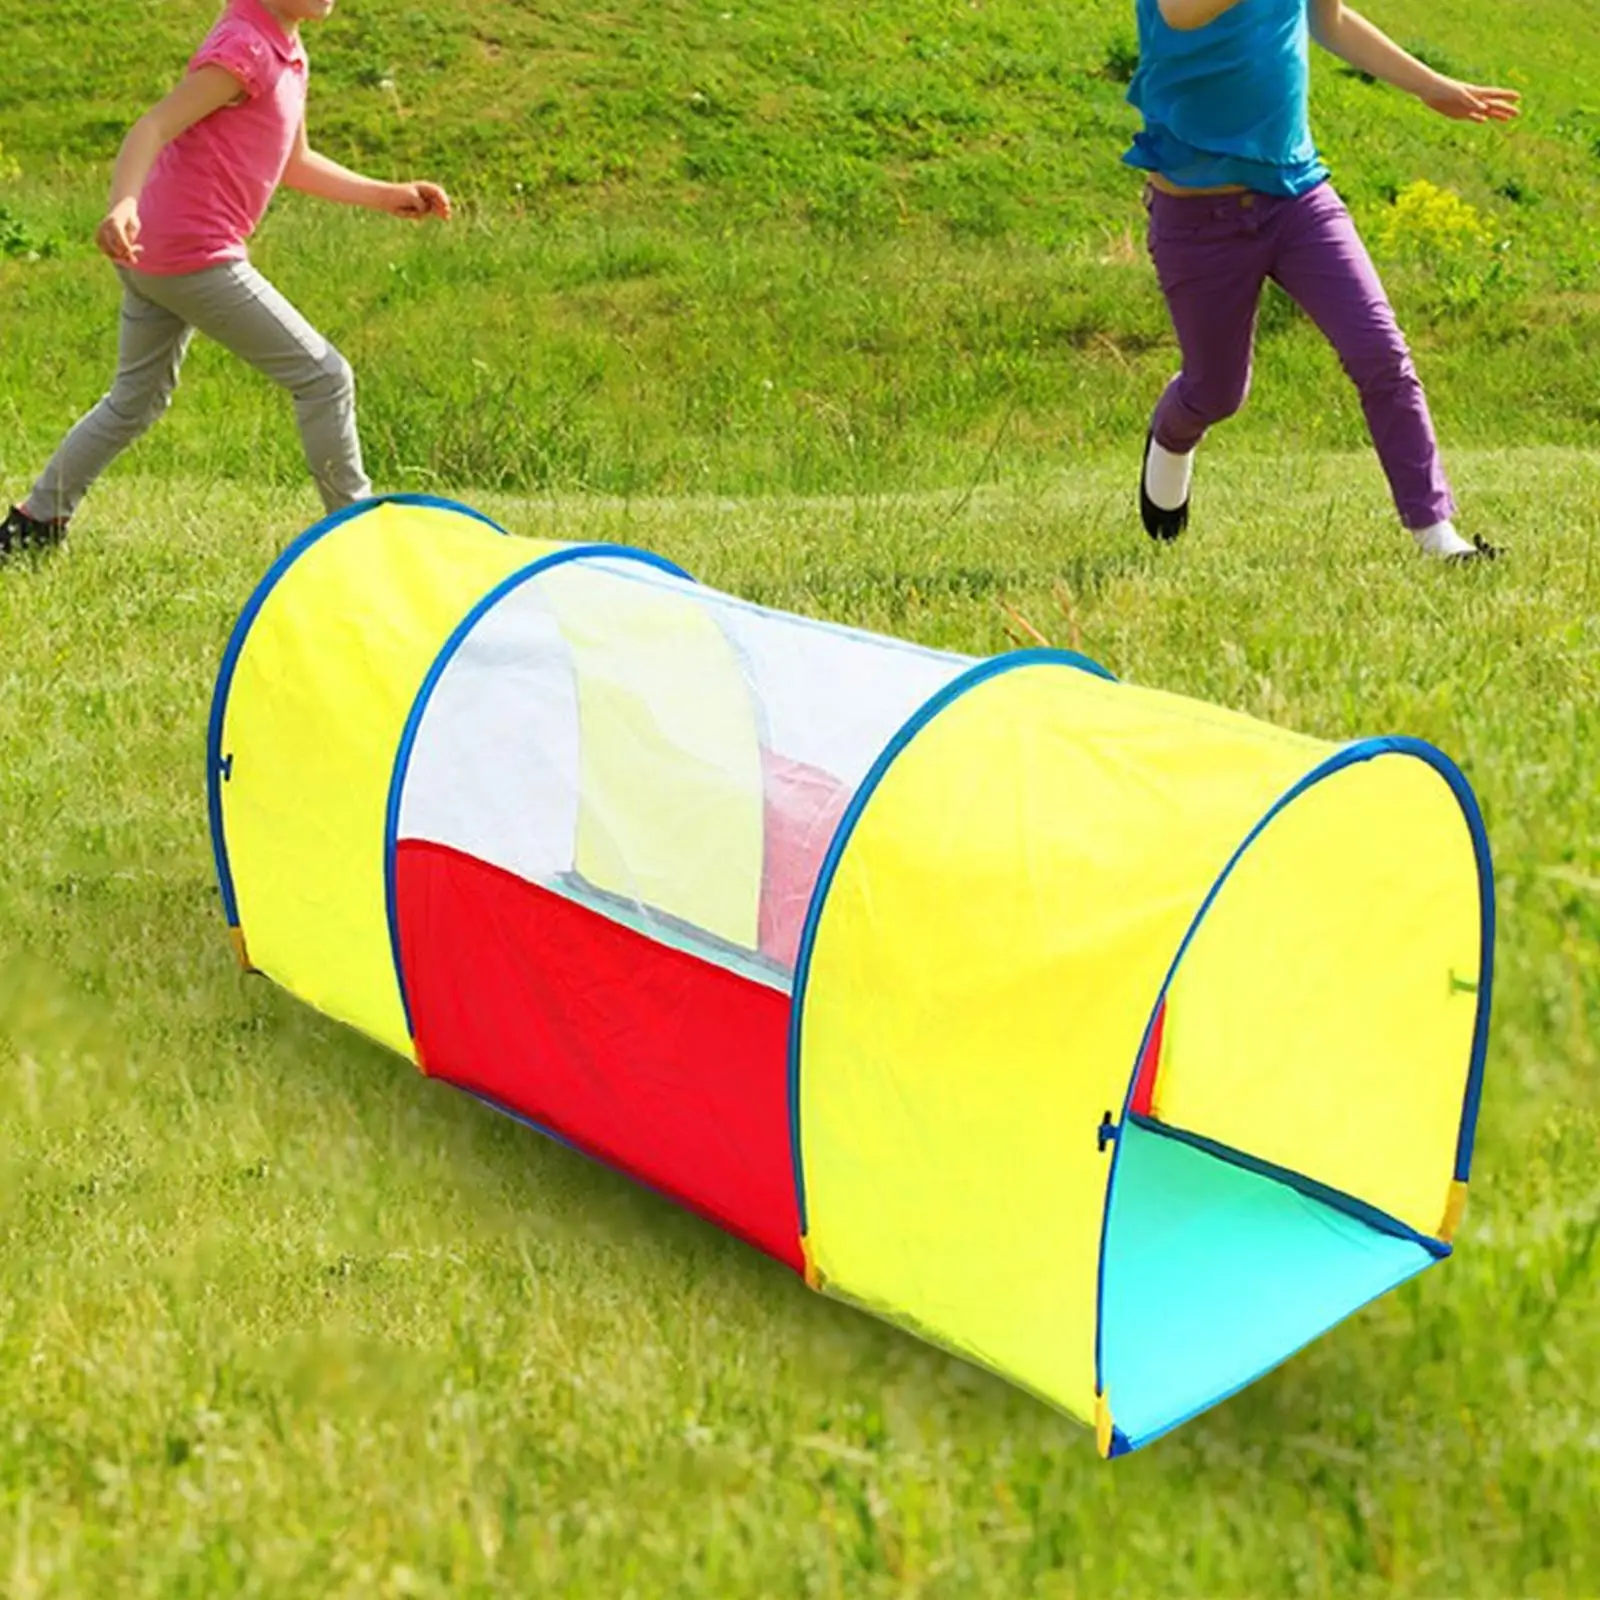 Portable Kids Play Tunnel Tent Indoor Outdoor Toy Backyard Playset for Girls